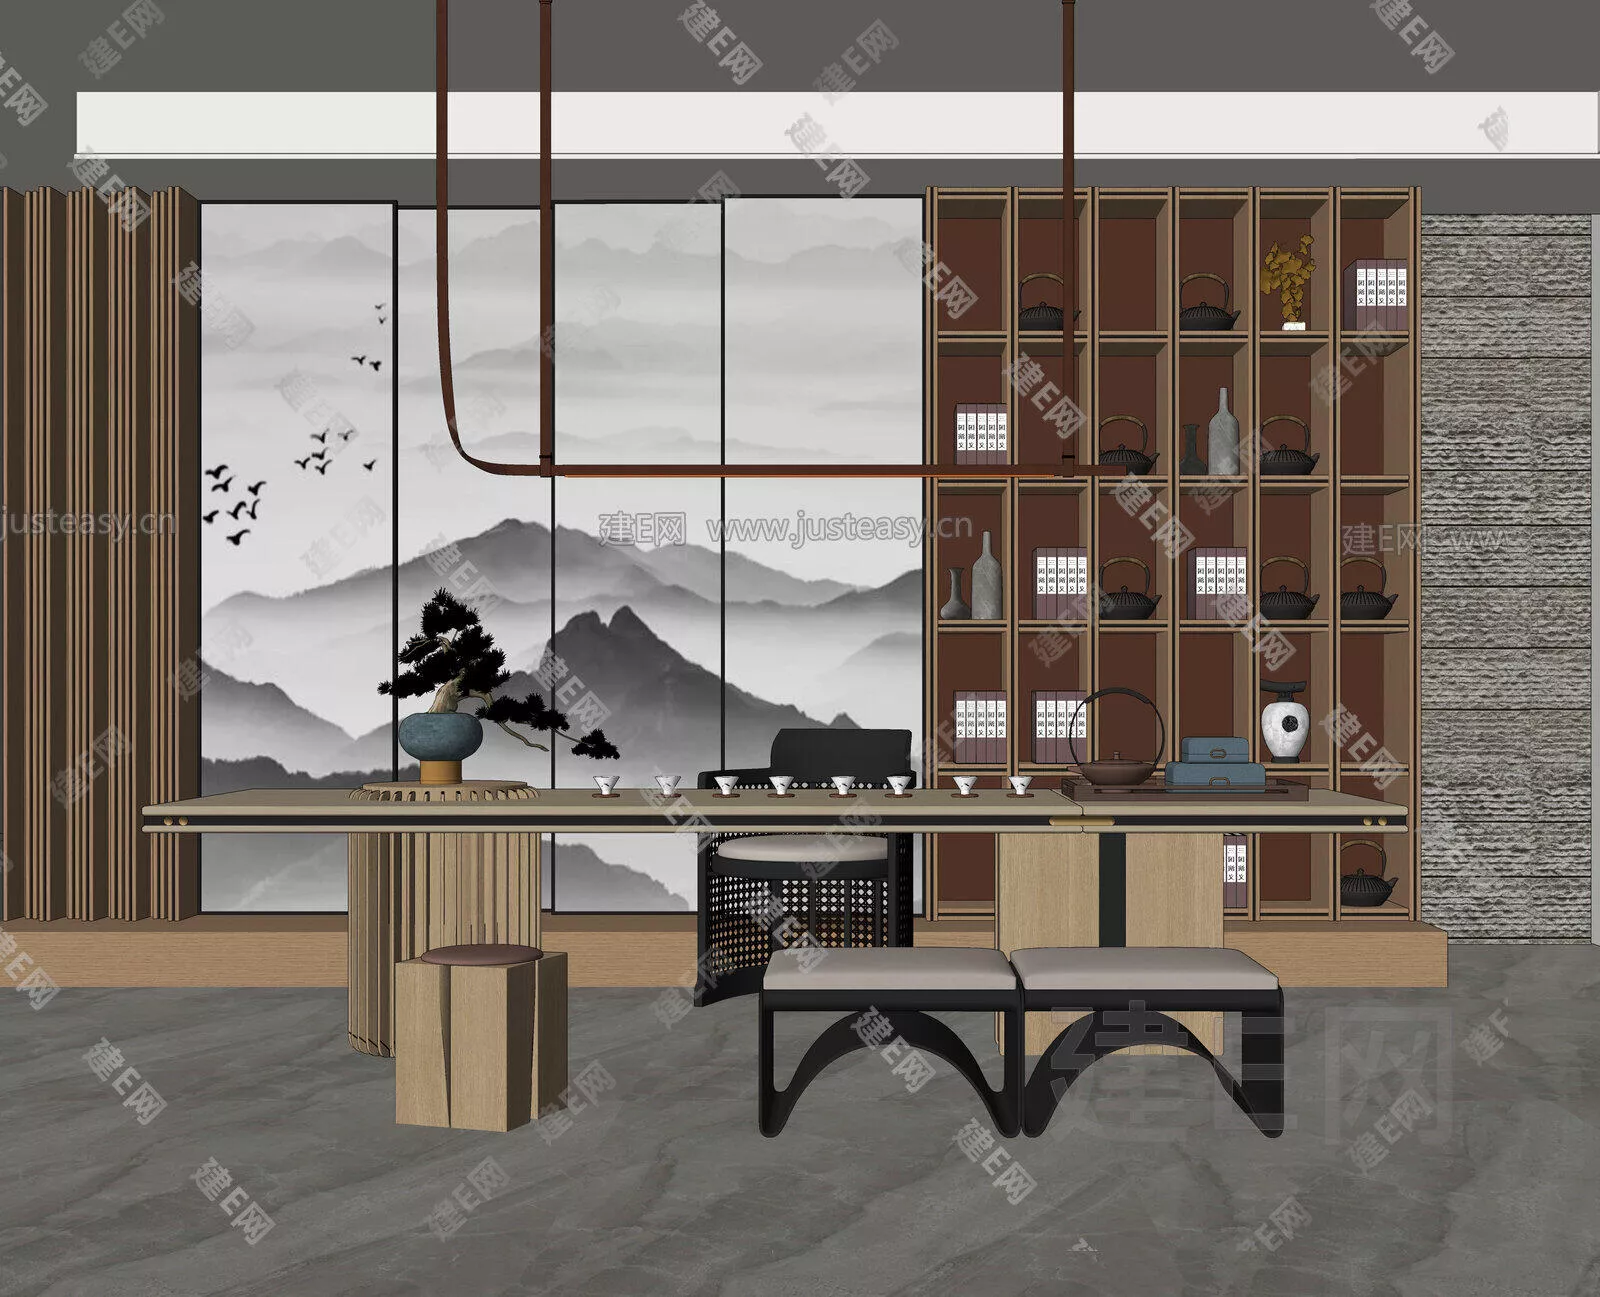 CHINESE TEAROOM - SKETCHUP 3D SCENE - ENSCAPE - 112411777